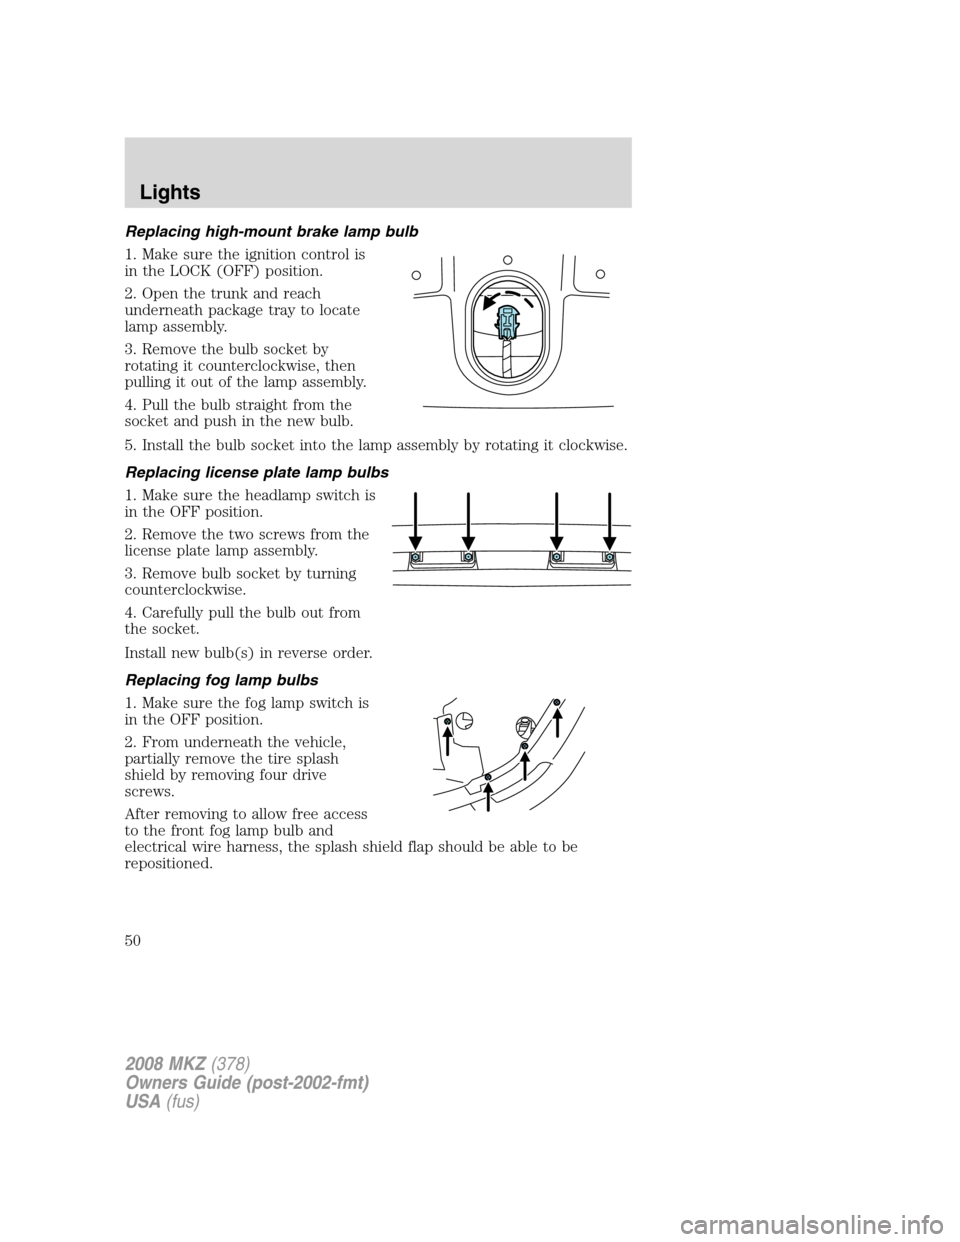 LINCOLN MKZ 2008  Owners Manual Replacing high-mount brake lamp bulb
1. Make sure the ignition control is
in the LOCK (OFF) position.
2. Open the trunk and reach
underneath package tray to locate
lamp assembly.
3. Remove the bulb so